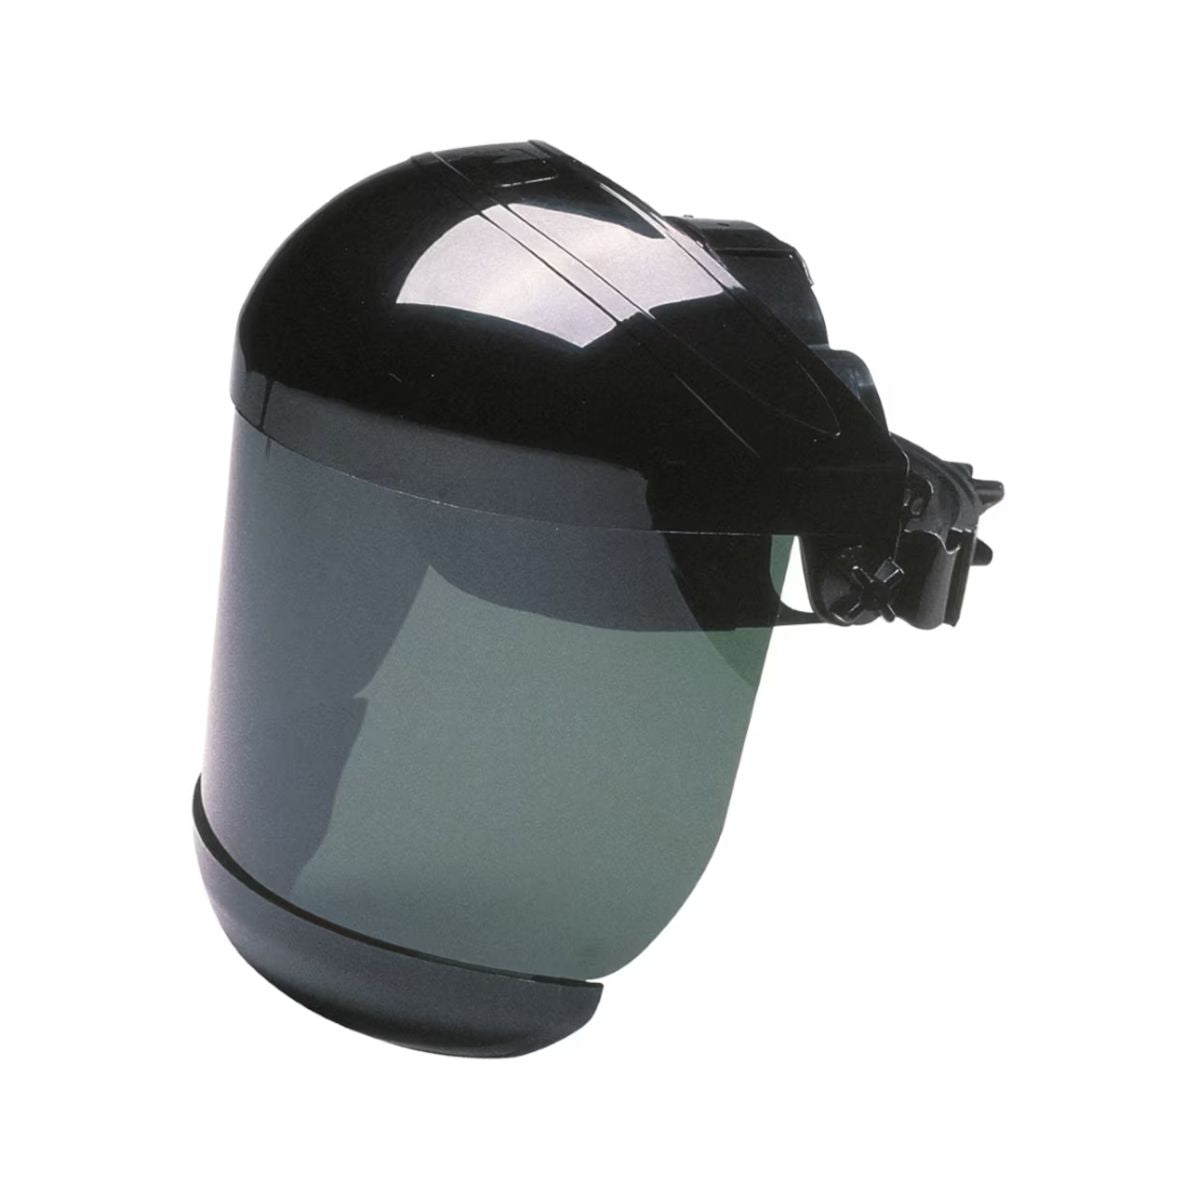 MSA Black Eagle Faceshield Complete with Green Shade 5 Visor 227500GN5